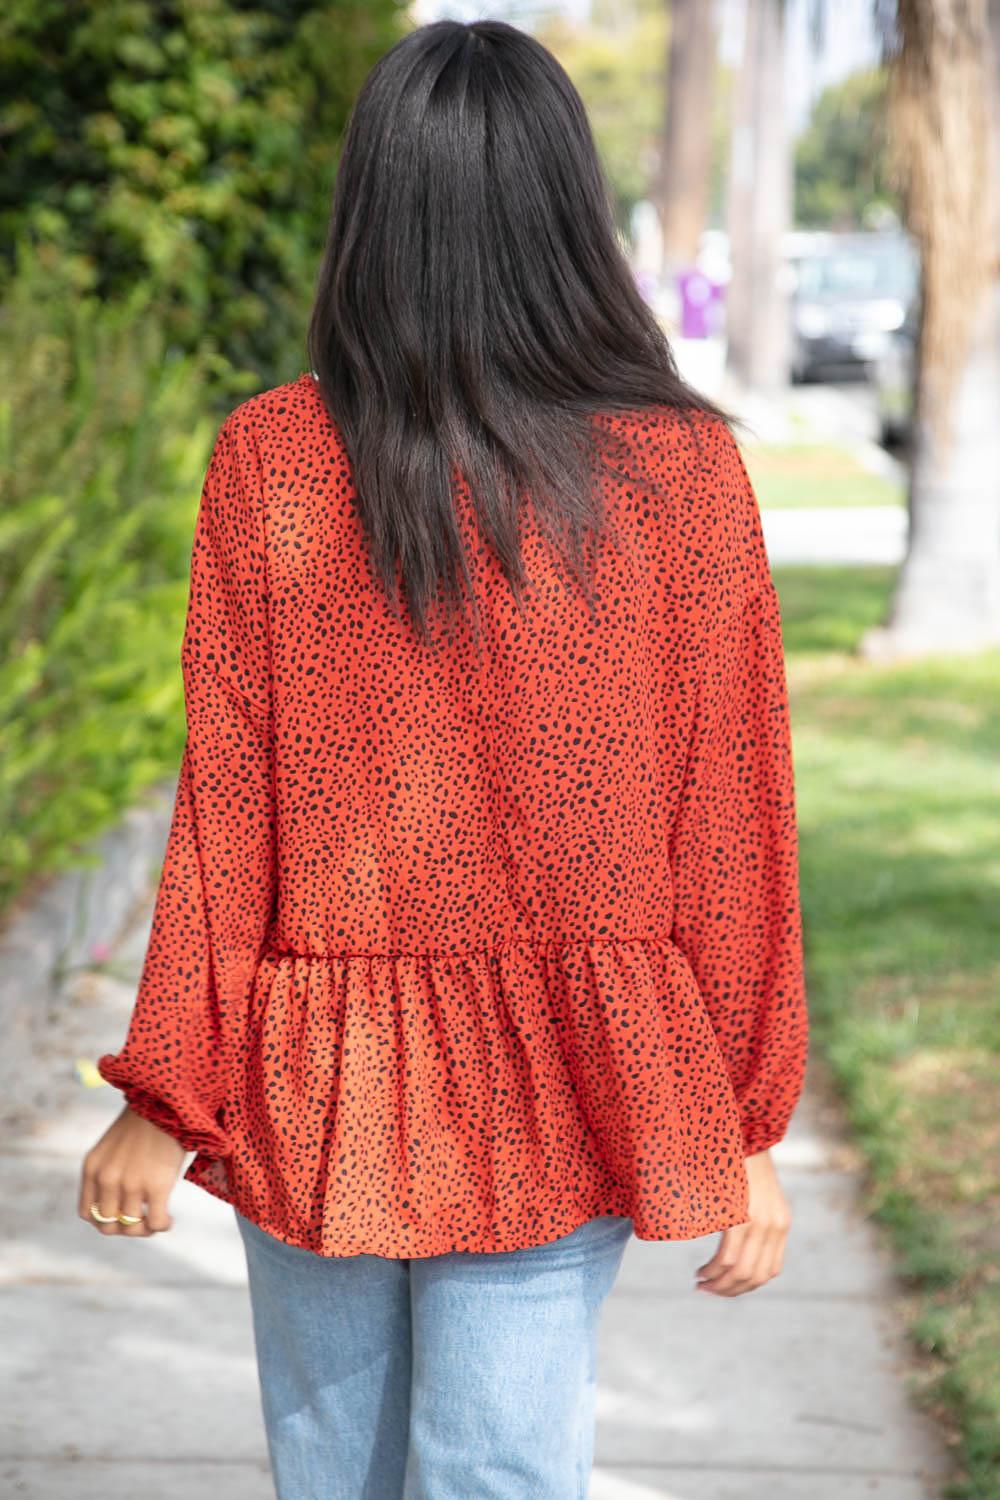 Living On The Edge Woven Knit Top - Atomic Wildflower